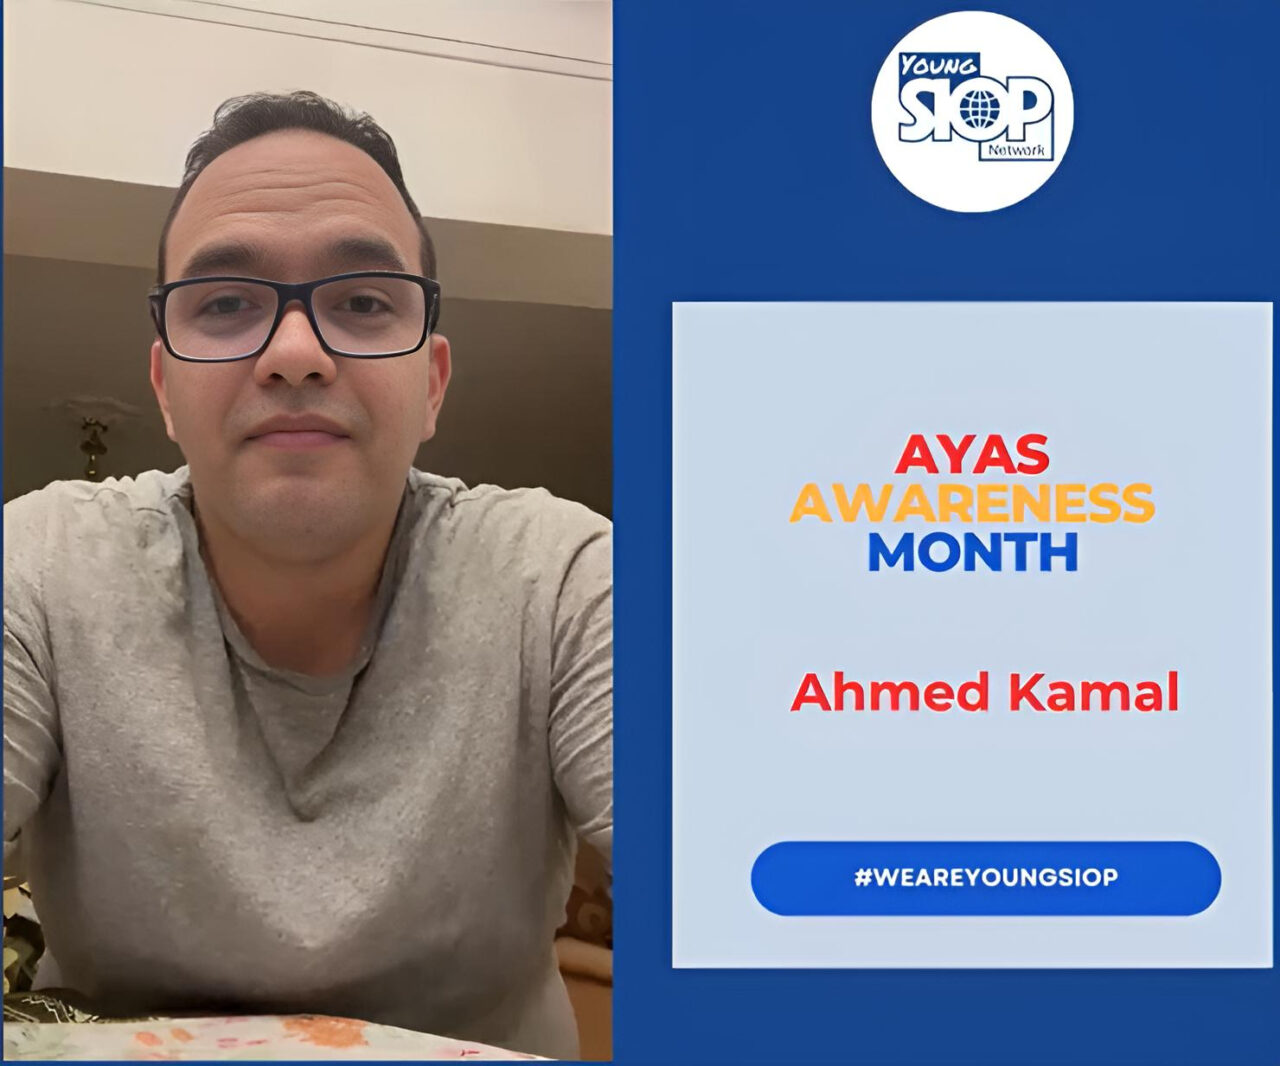 Ahmed Kamal shares with Young SIOP his point of view from AYAs with Cancer